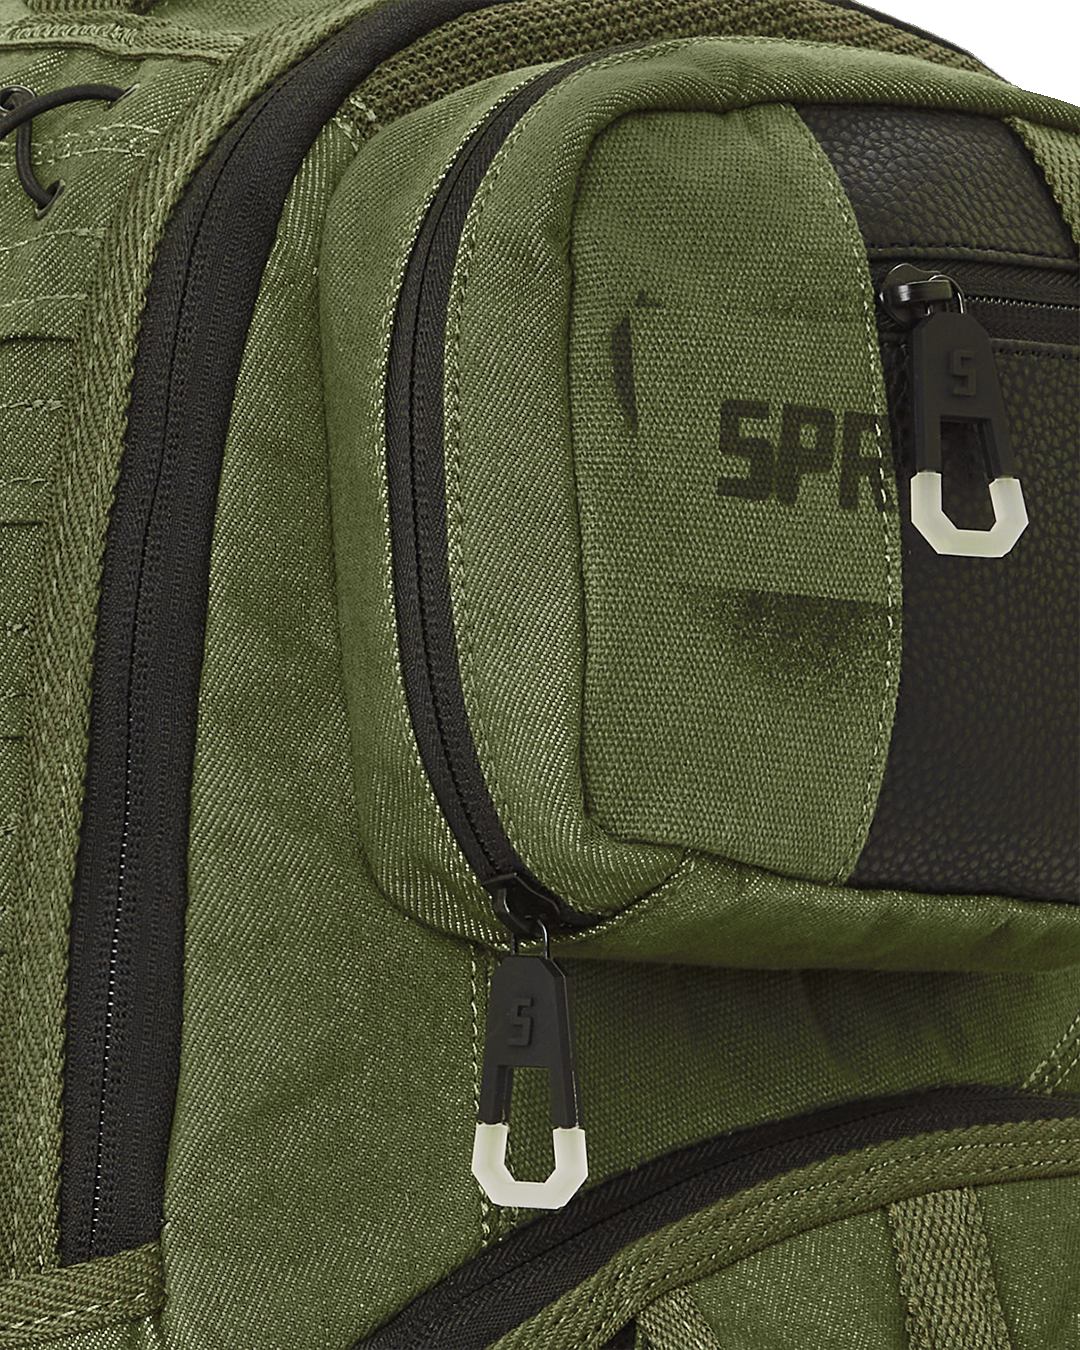 SPRAYGROUND® BACKPACK SPECIAL OPS OPERATION SUCCE$$ BACKPACK